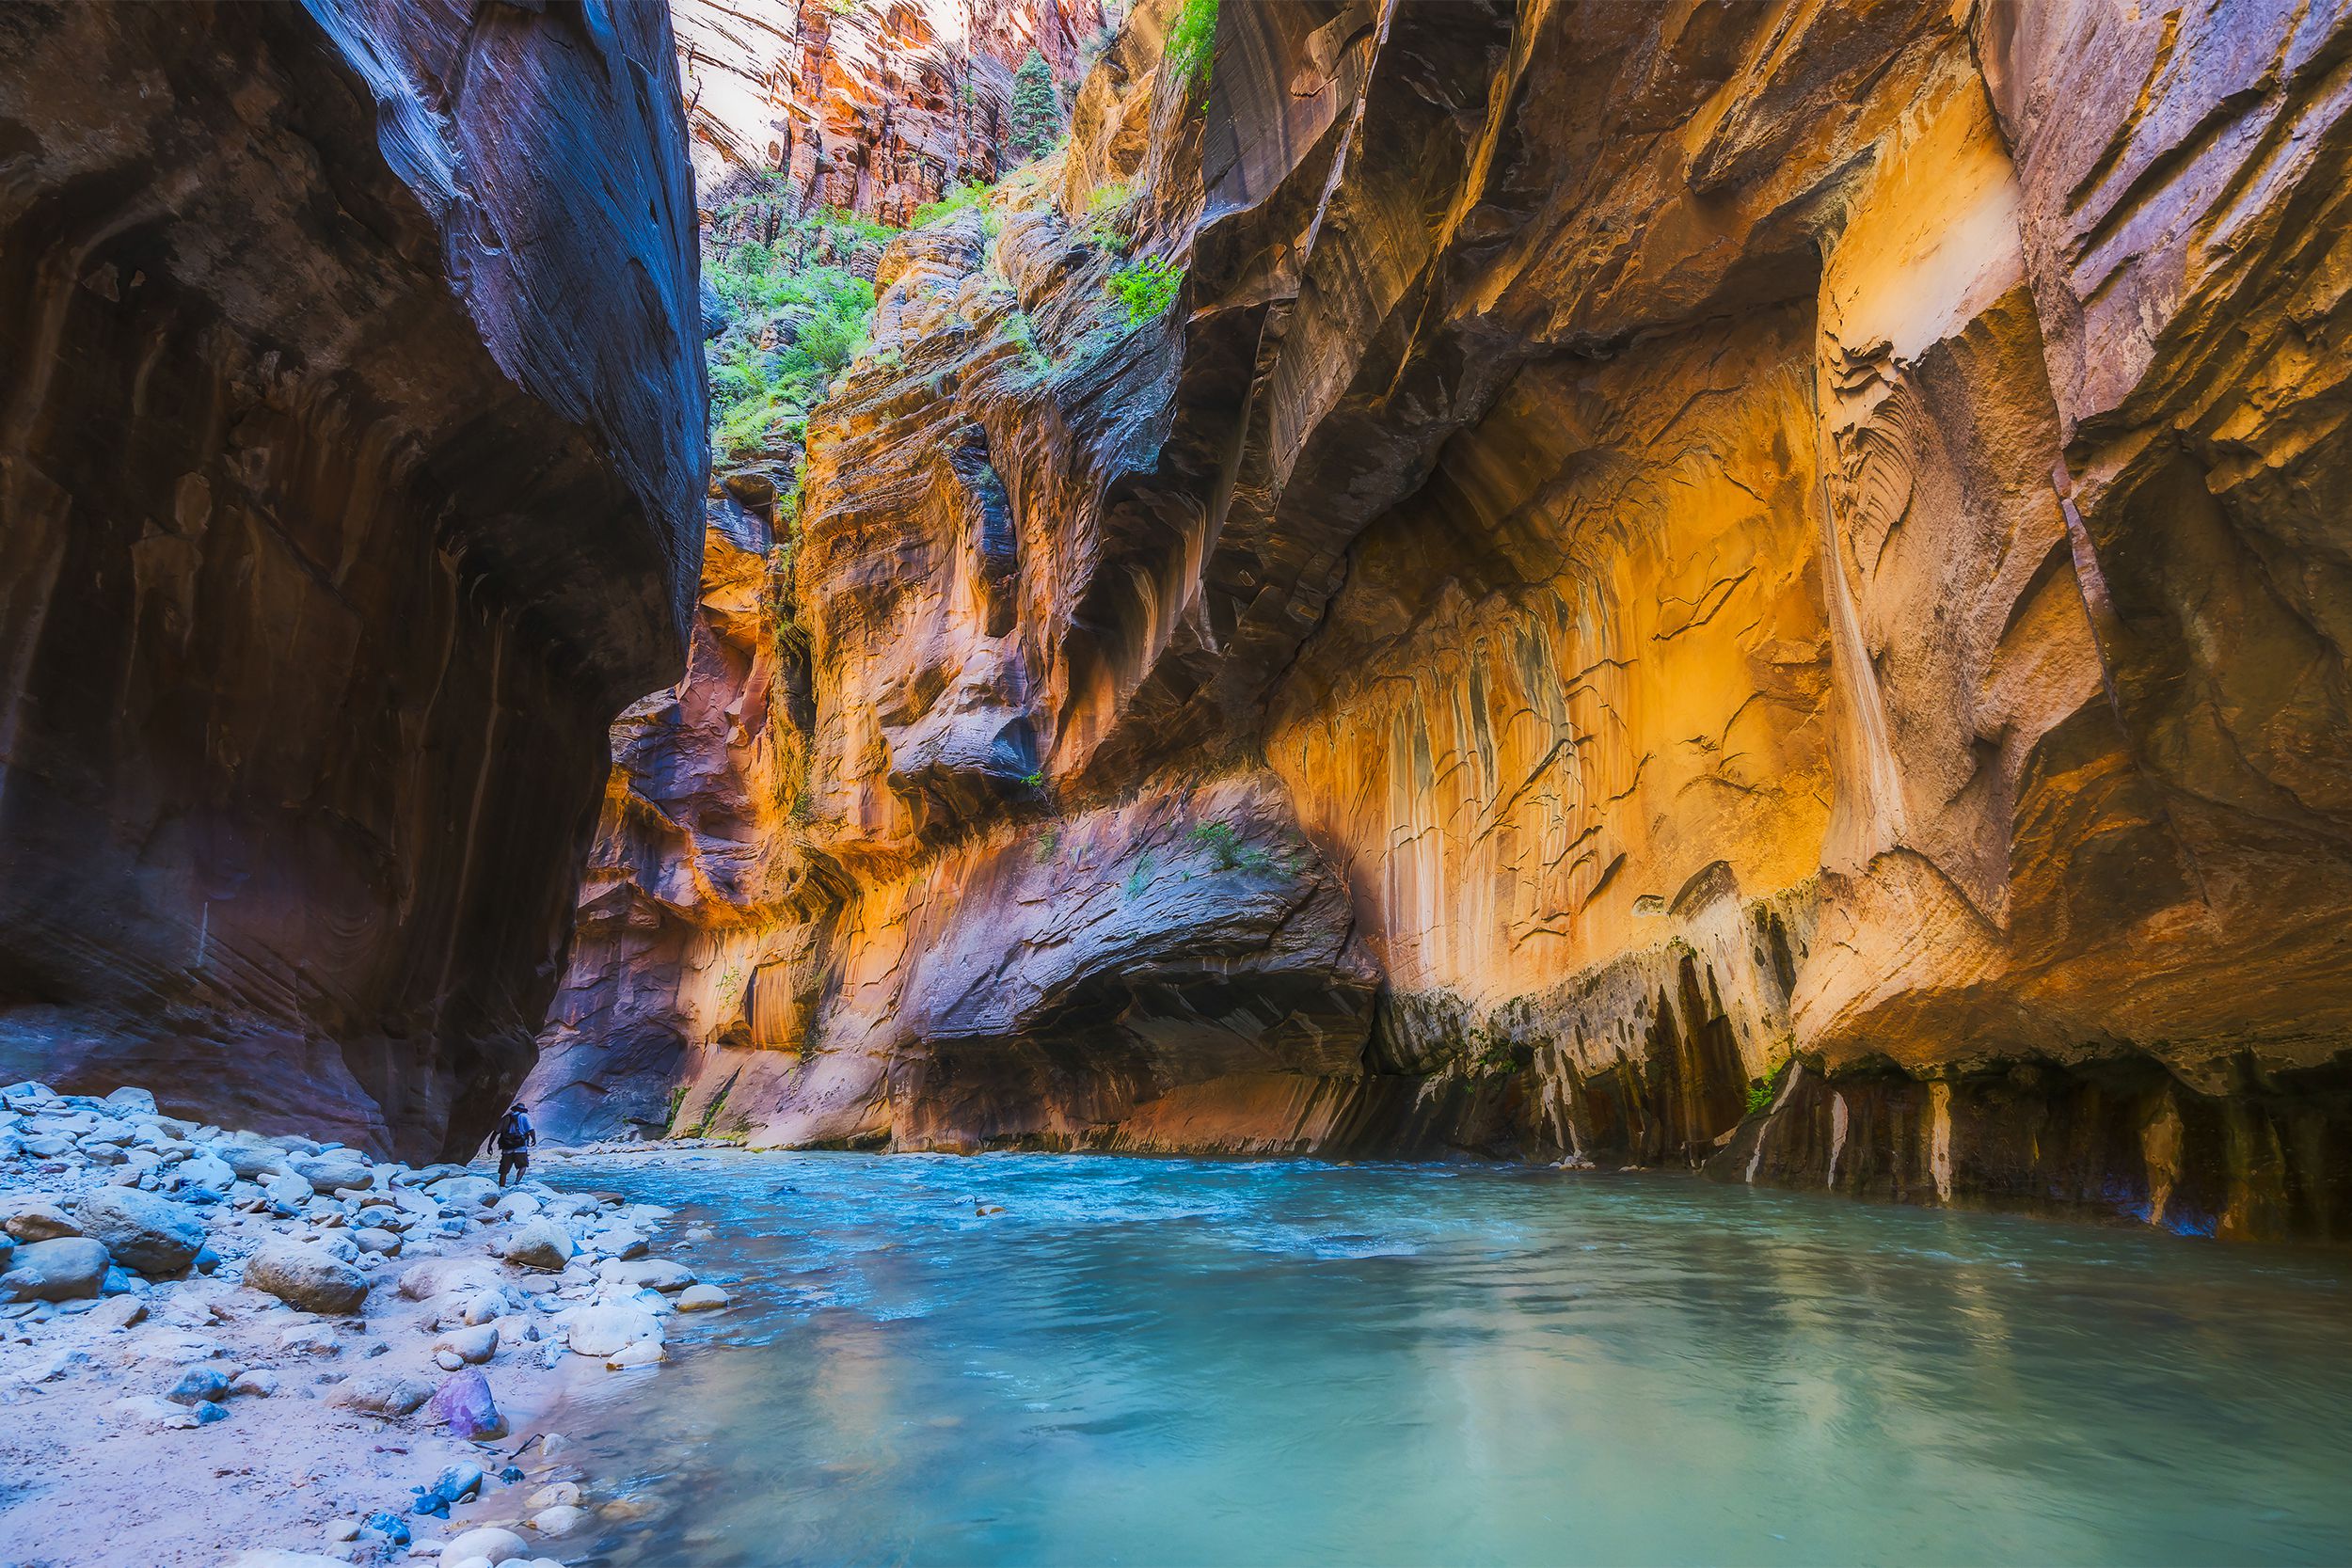 <p>The first national park to be created in Utah, <a href="https://www.nps.gov/zion/index.htm">Zion</a> has massive sandstone cliffs, narrow slot canyons, and a diversity of plants and animals. </p><div class="rich-text"><p>This article was originally published on <a href="https://blog.cheapism.com/national-parks-photos/">Cheapism</a></p></div>